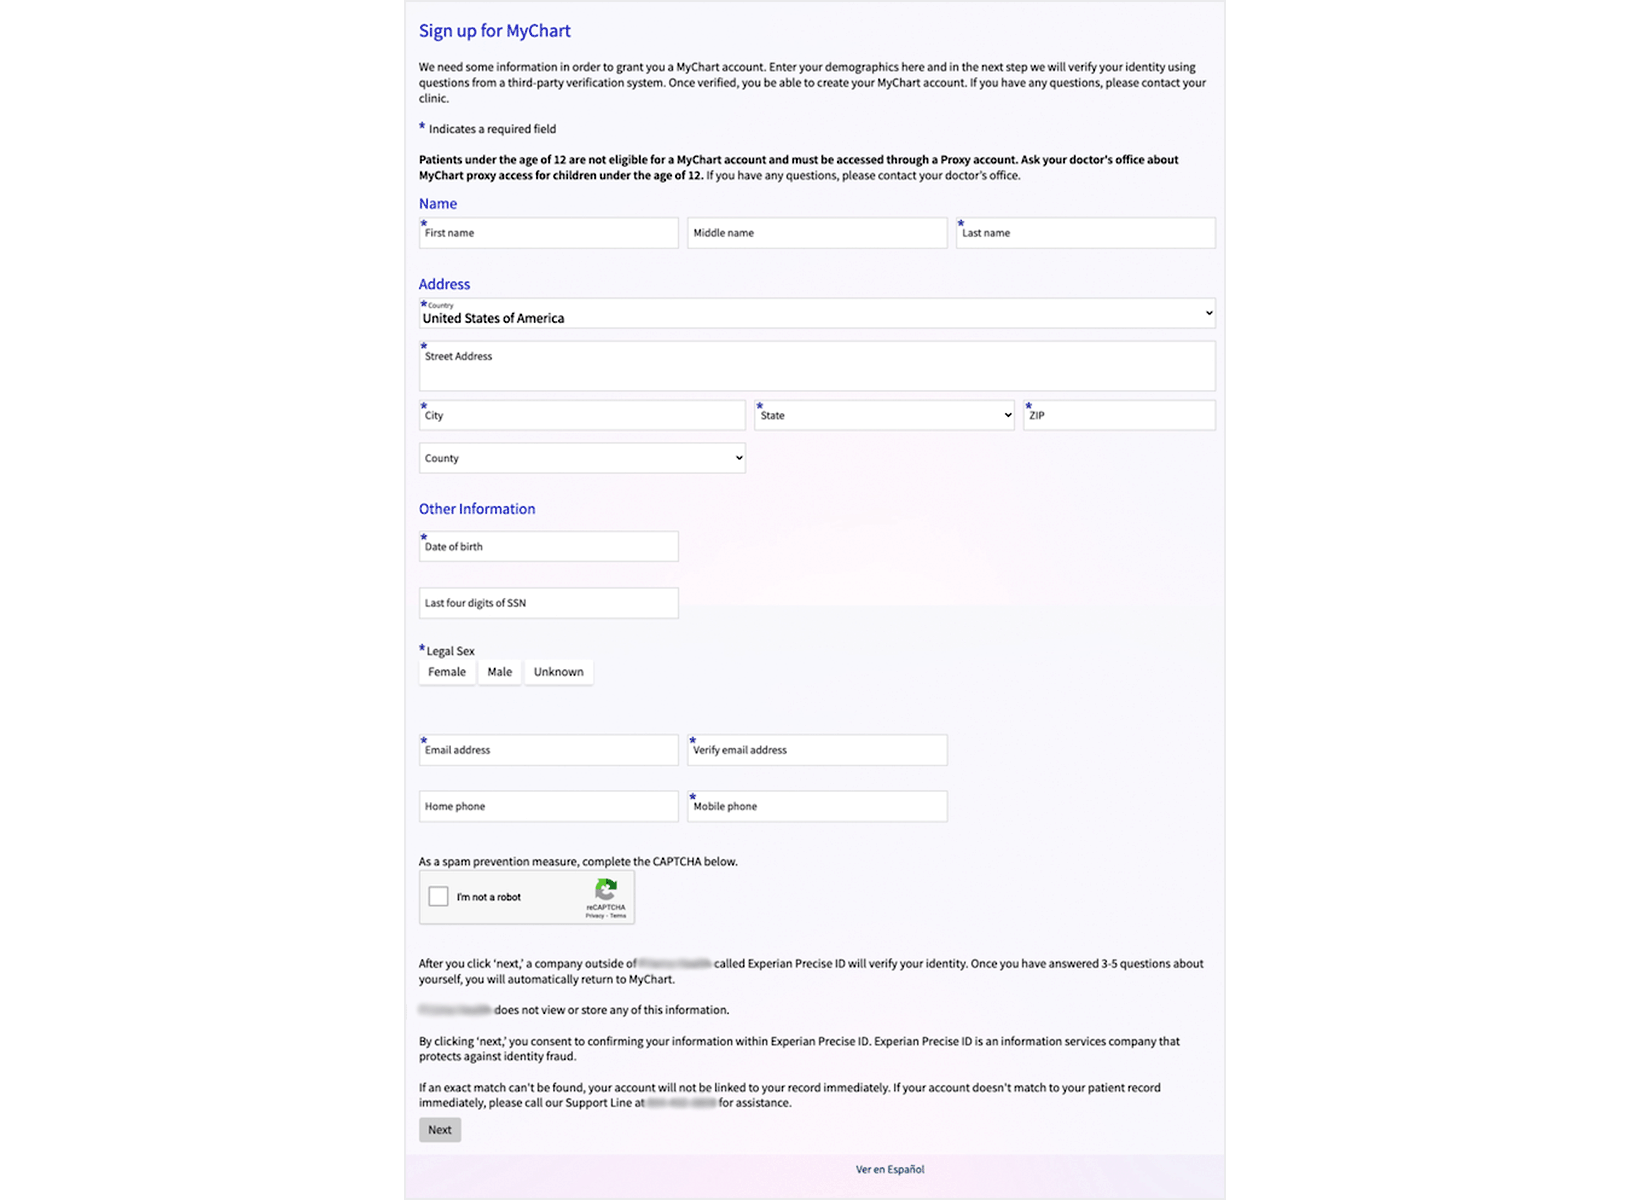 A long sign-up form, with paragraphs of small, text and the top and bottom of the form. There are many fields and the form has three different sections.